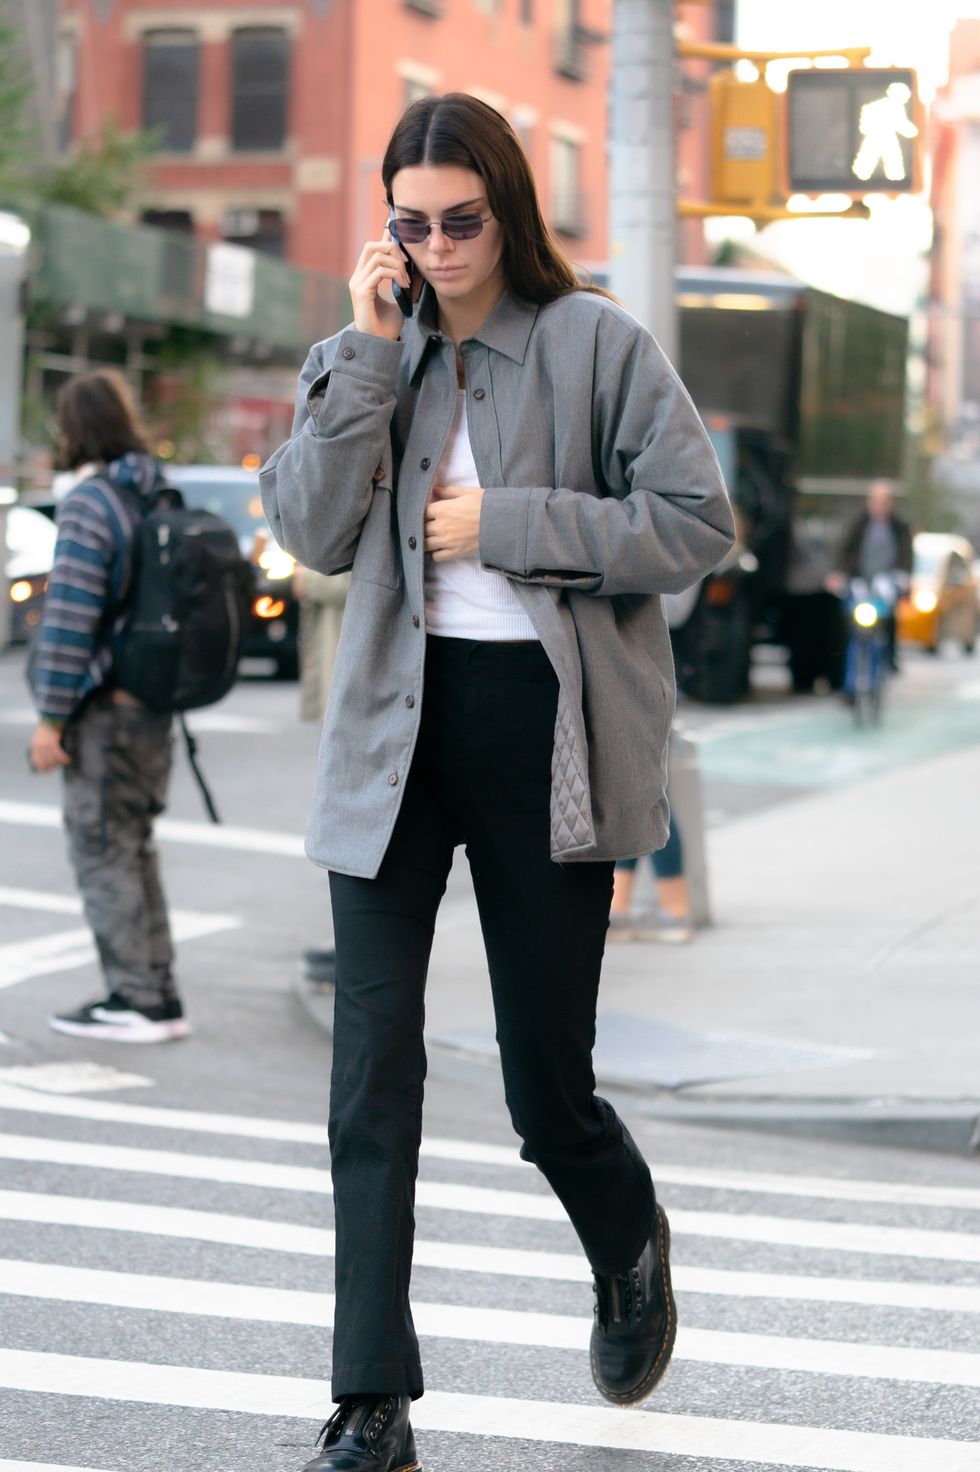 Kendall Jenner's Favorite Dr. Marten Boots Are 15% Off For Prime Day